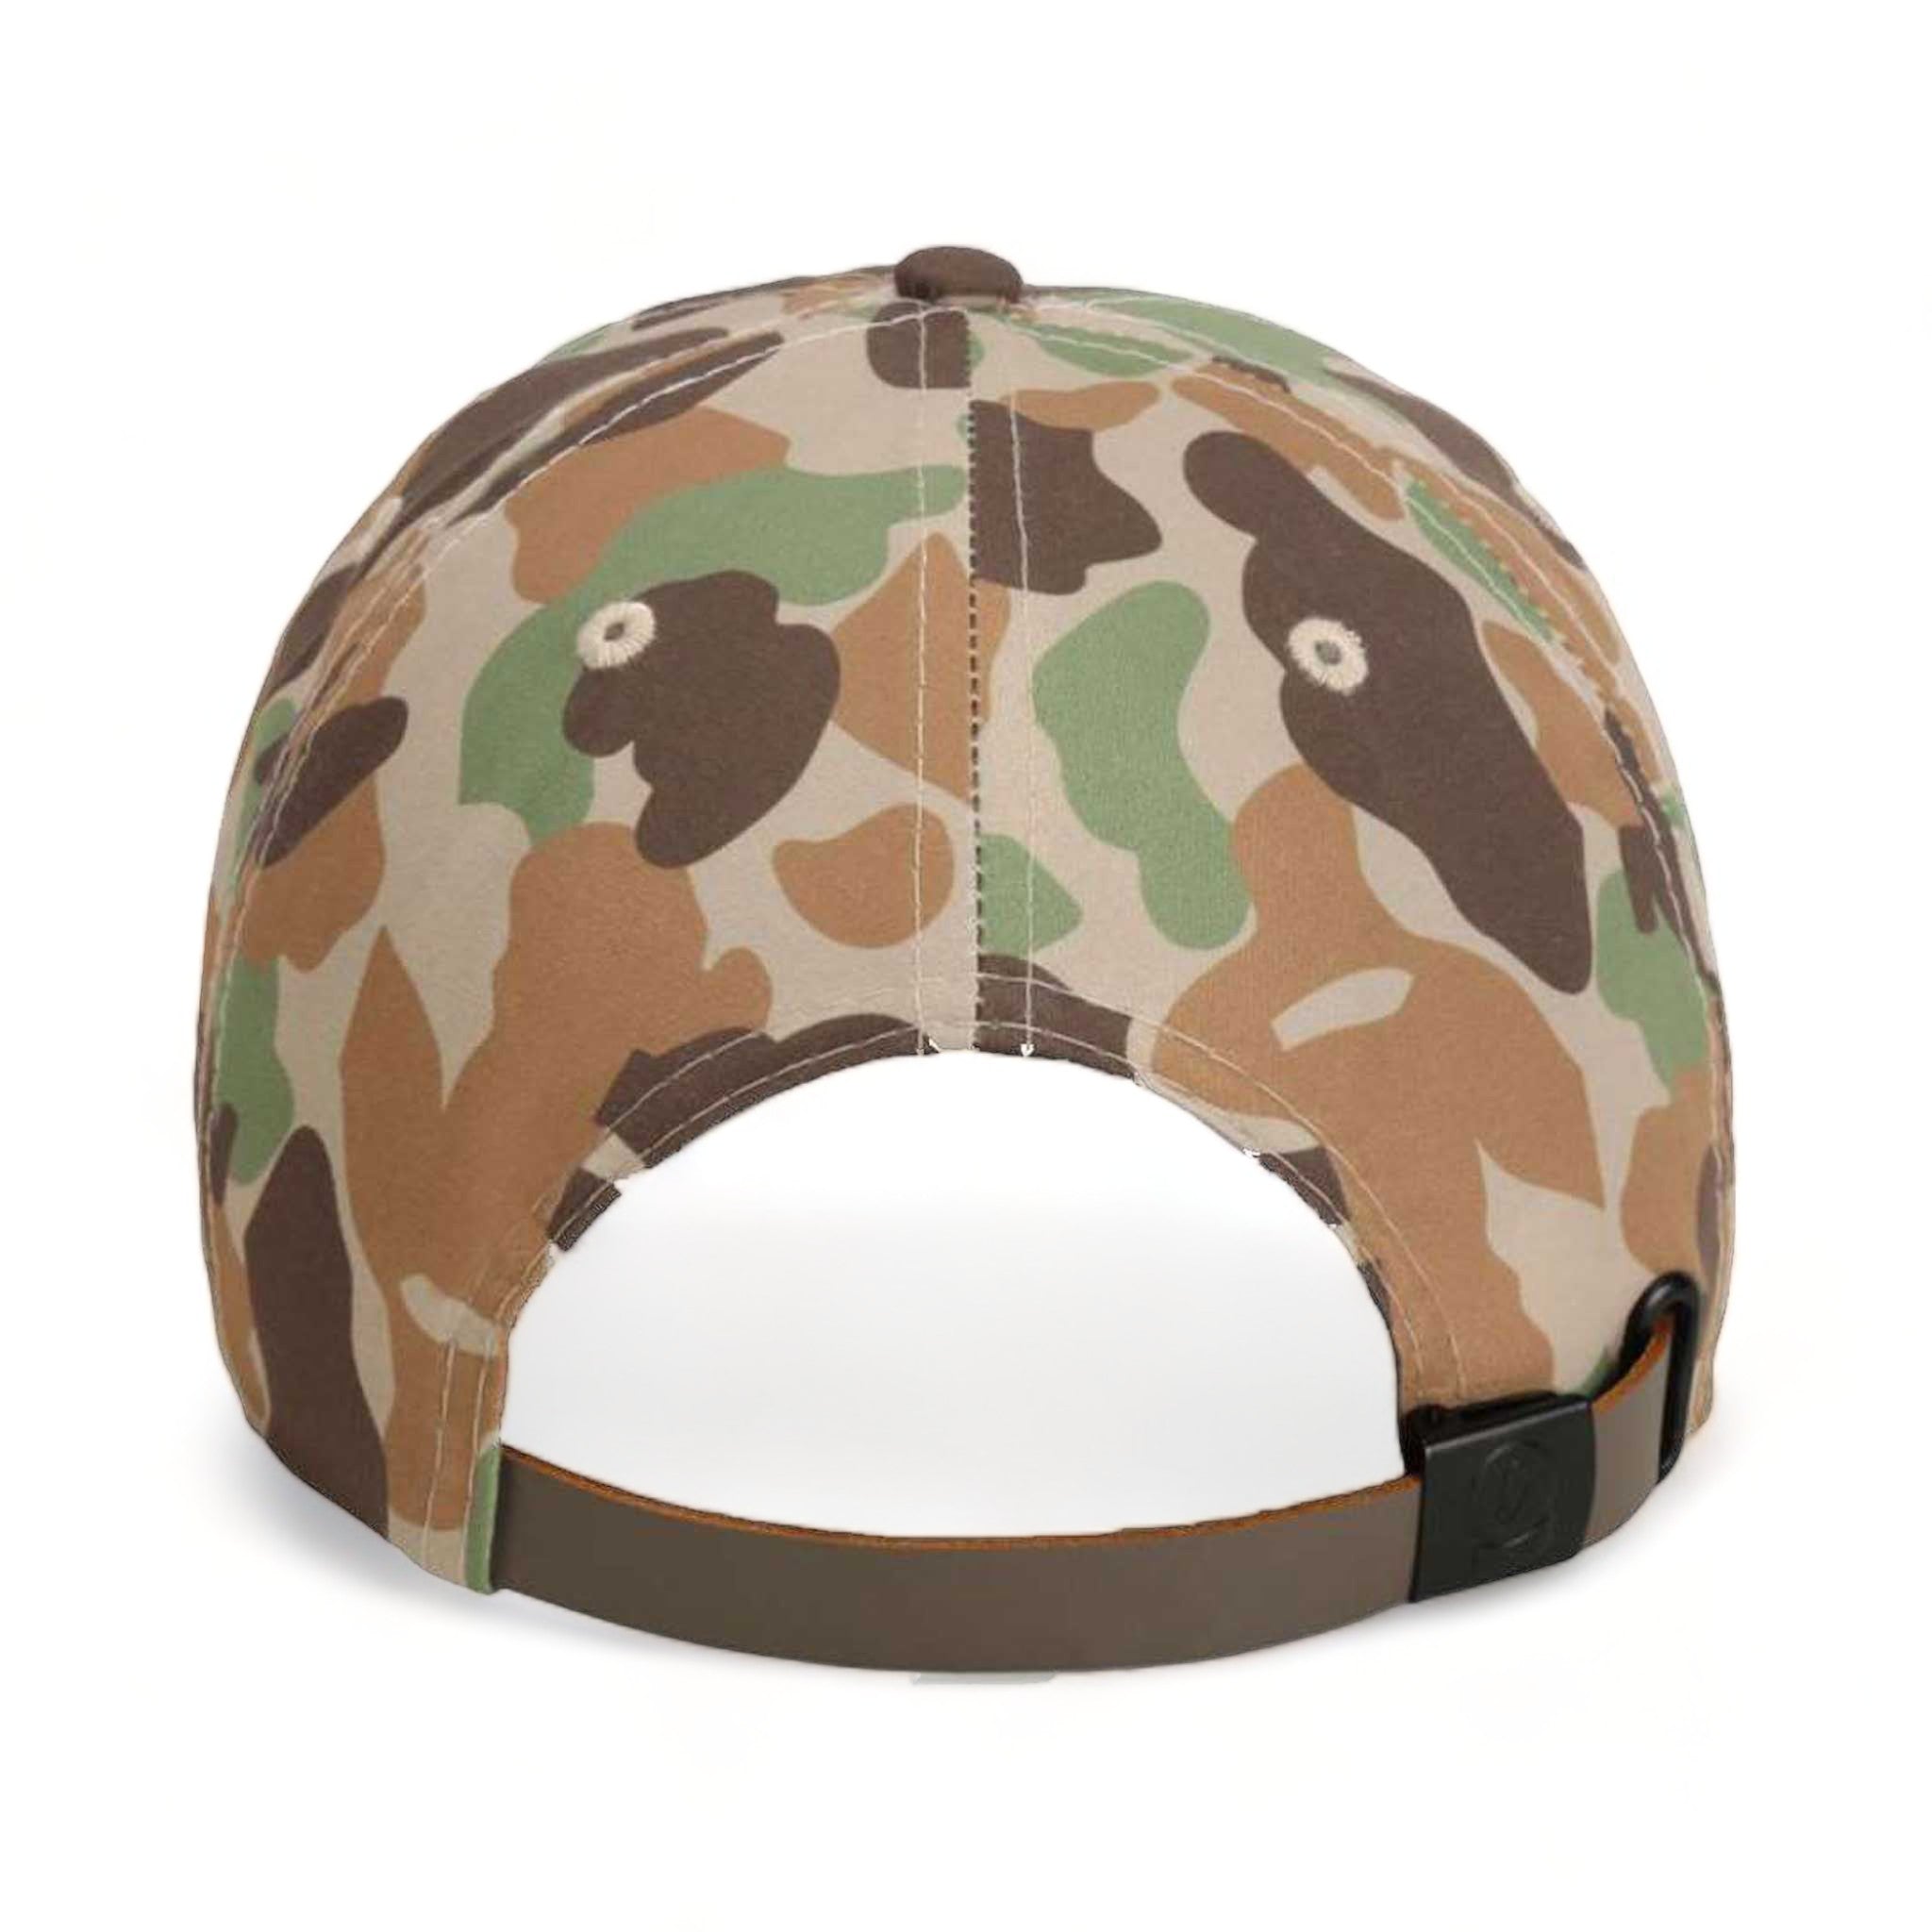 Back view of Imperial DNA010 custom hat in frog skin camo and brown